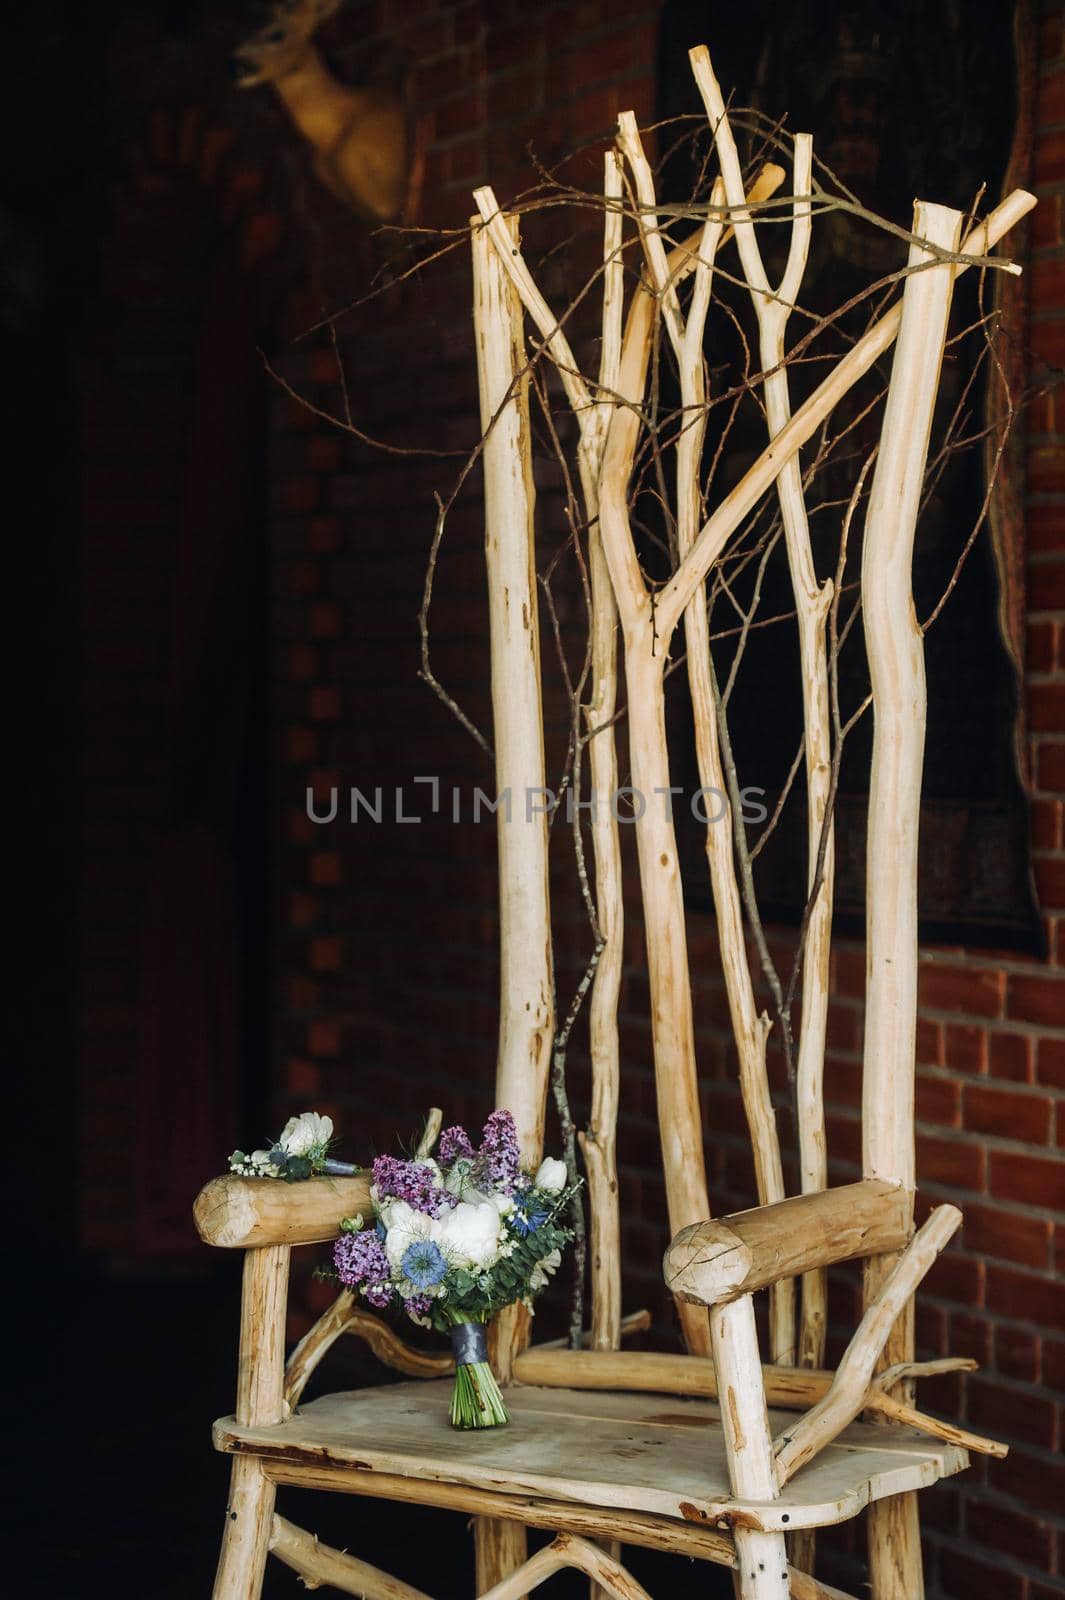 a spring Wedding bouquet of lilac and white roses lies on a decorative wooden chair.Wedding bouquet, details, wedding, decor.